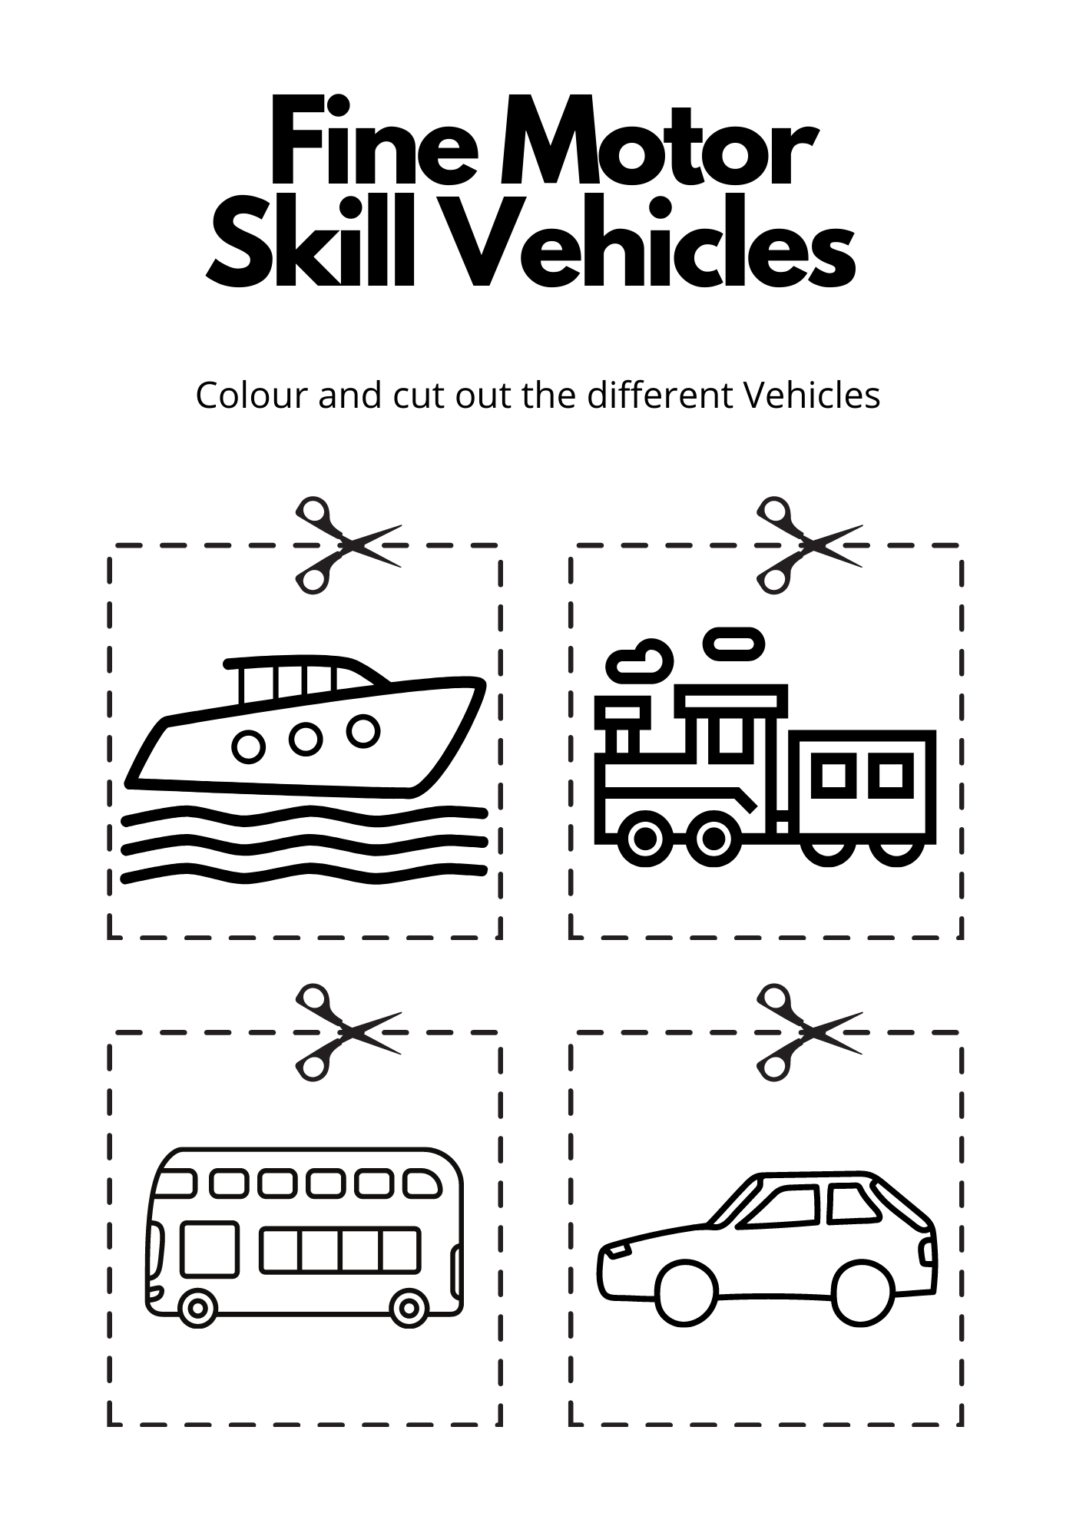 Fine Motor Skill Vehicles Cut and Color Activity Sheet - Help My Kids